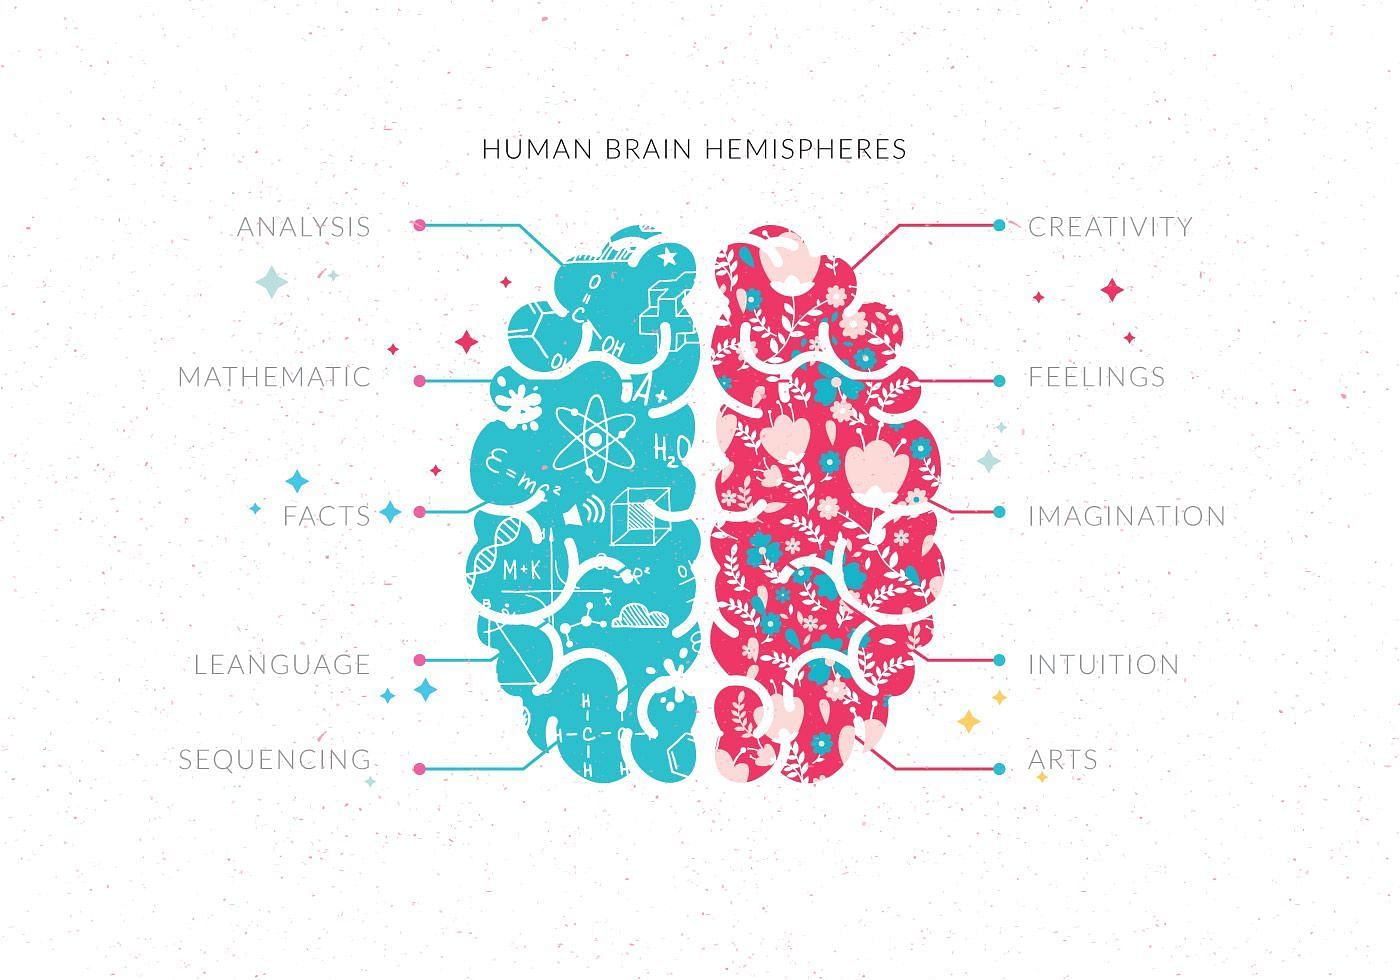 Are you left or right brained? What difference does it make in your everyday life? (Image via Vecteezy/ Sunshine -91)